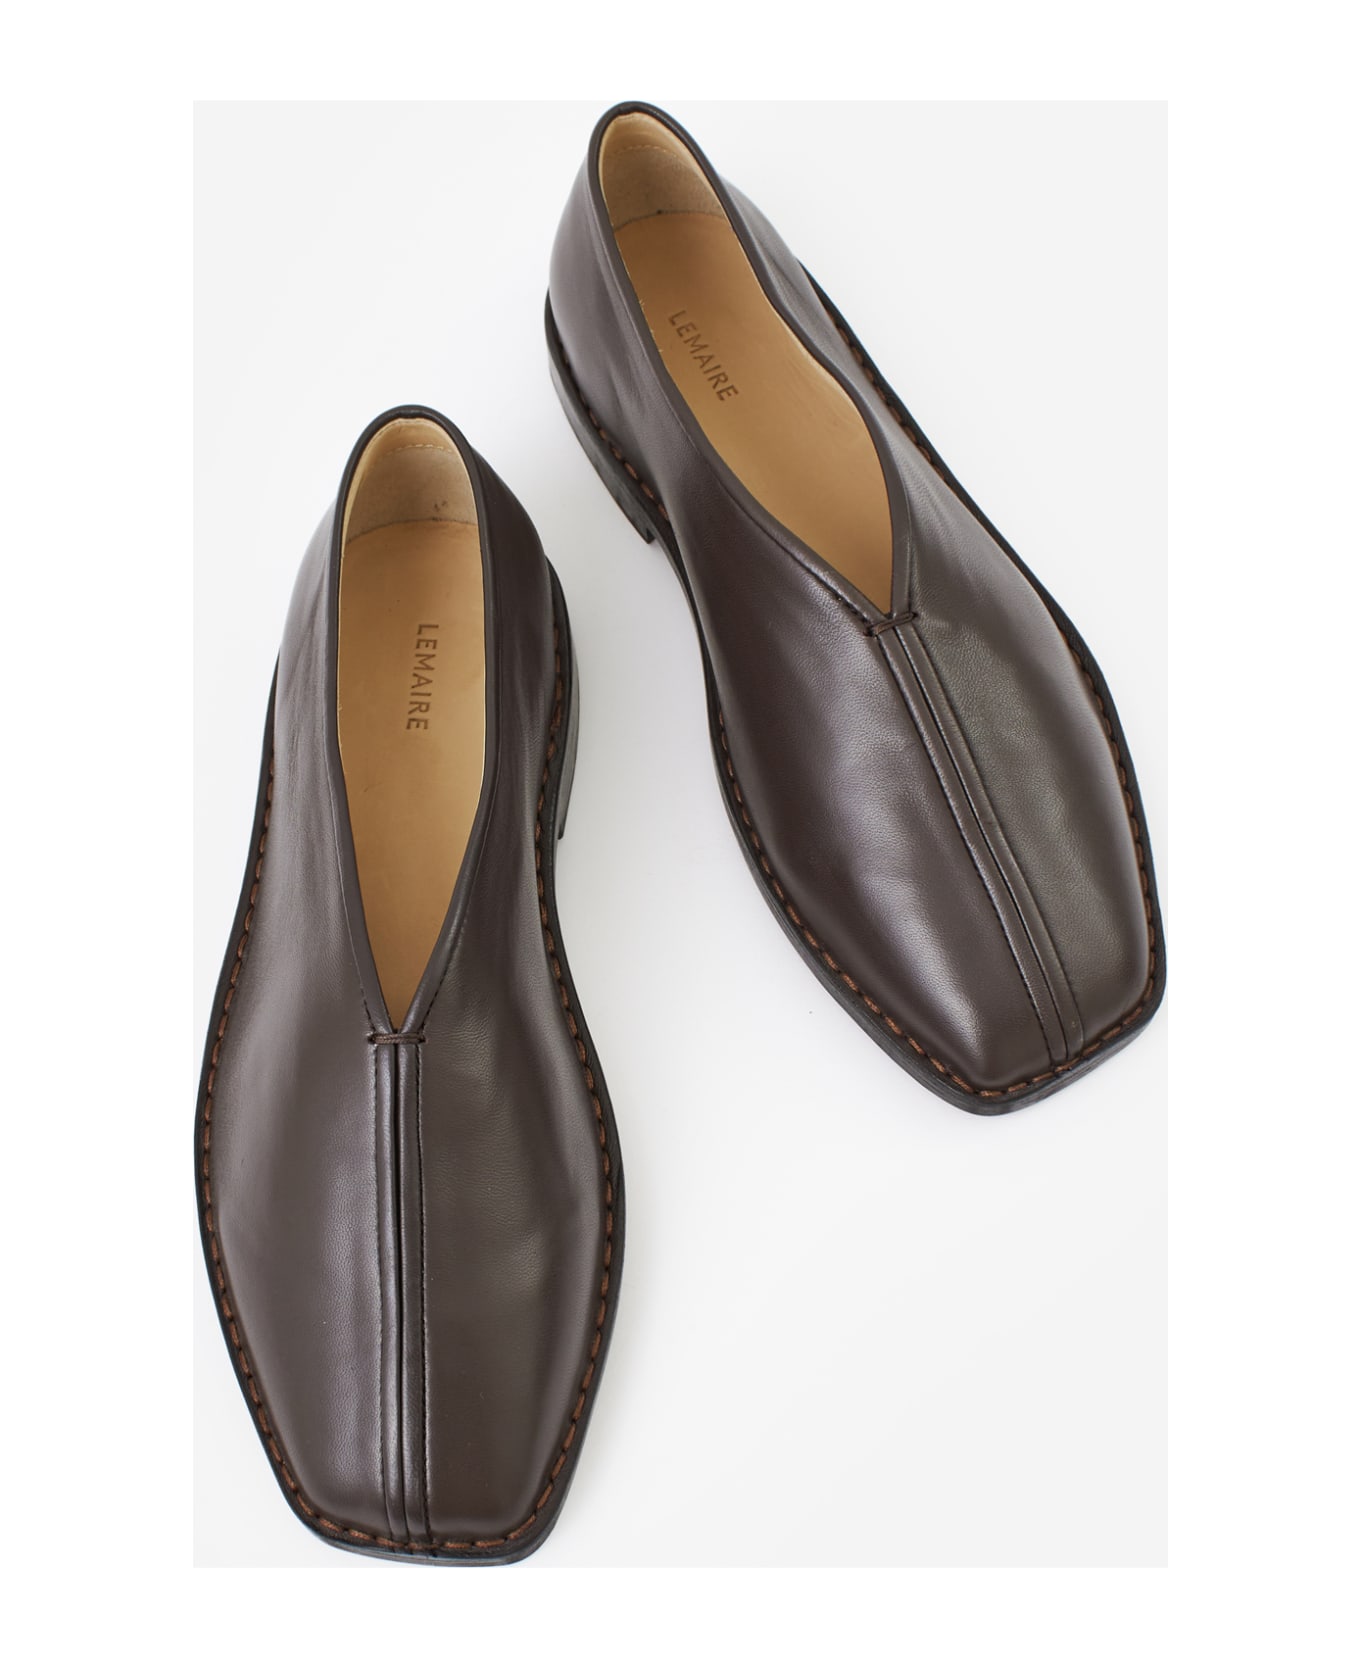 Lemaire Flat Piped Slippers Shoes - brown